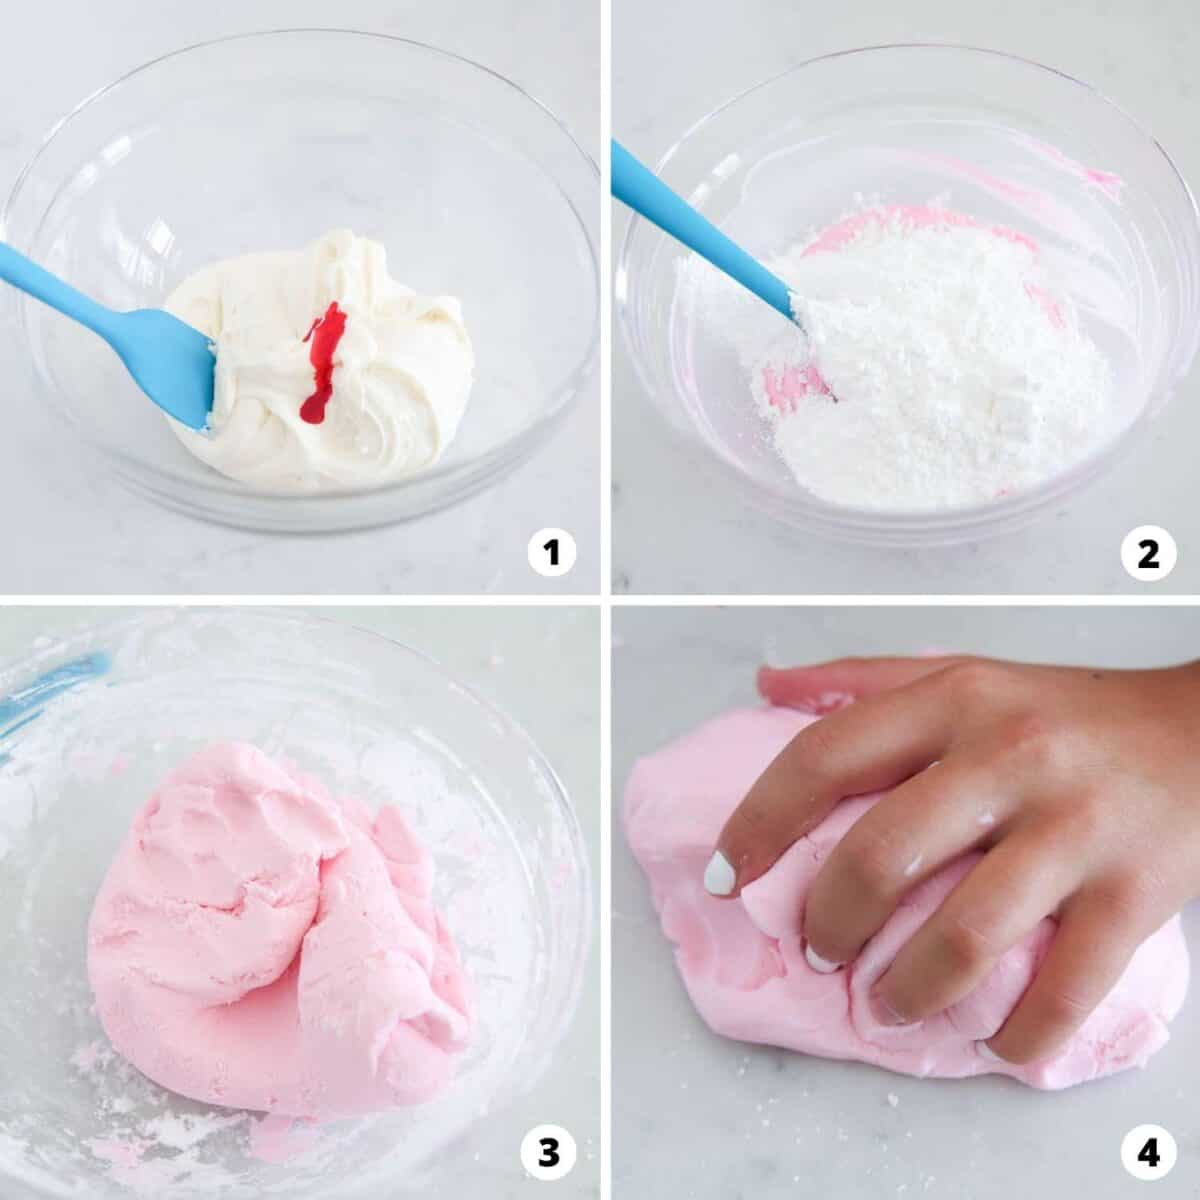 Step by step collage making edible playdough.